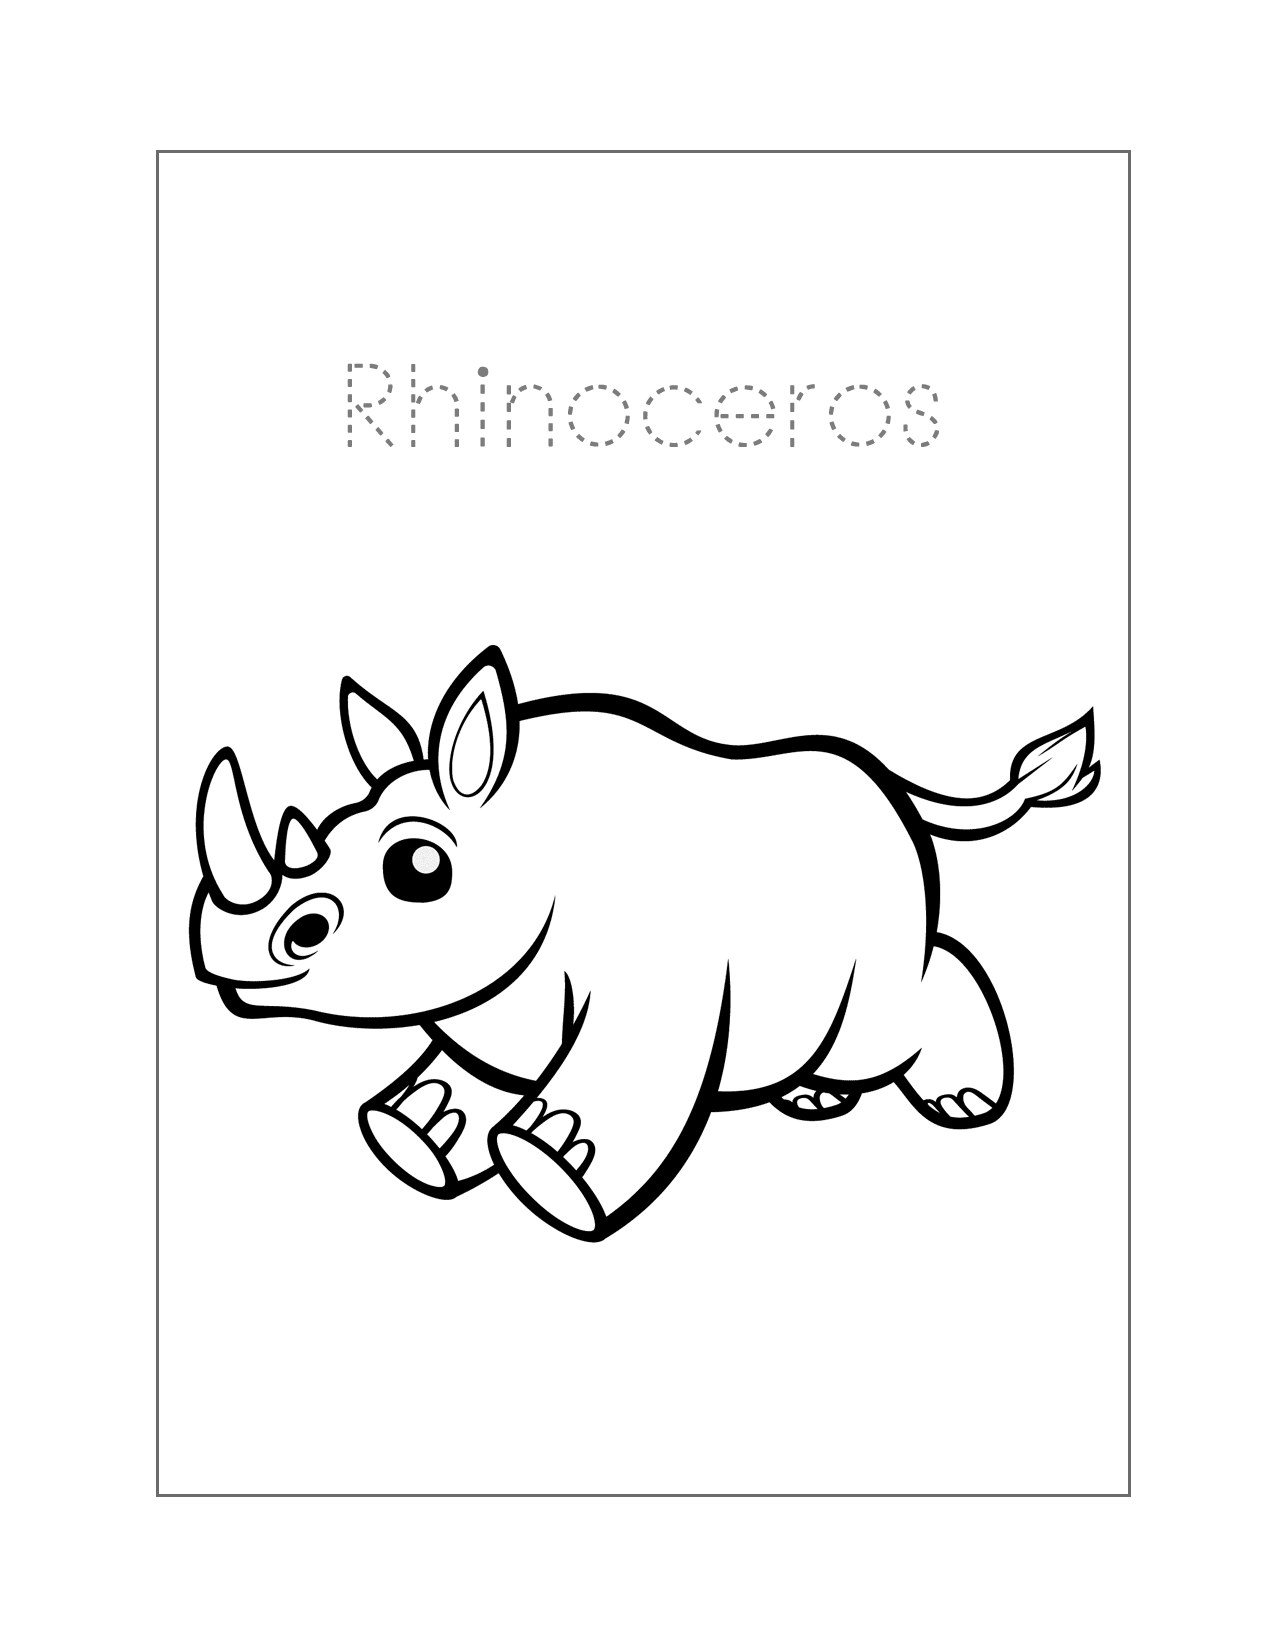 Rhinoceros Spelling And Coloring Page